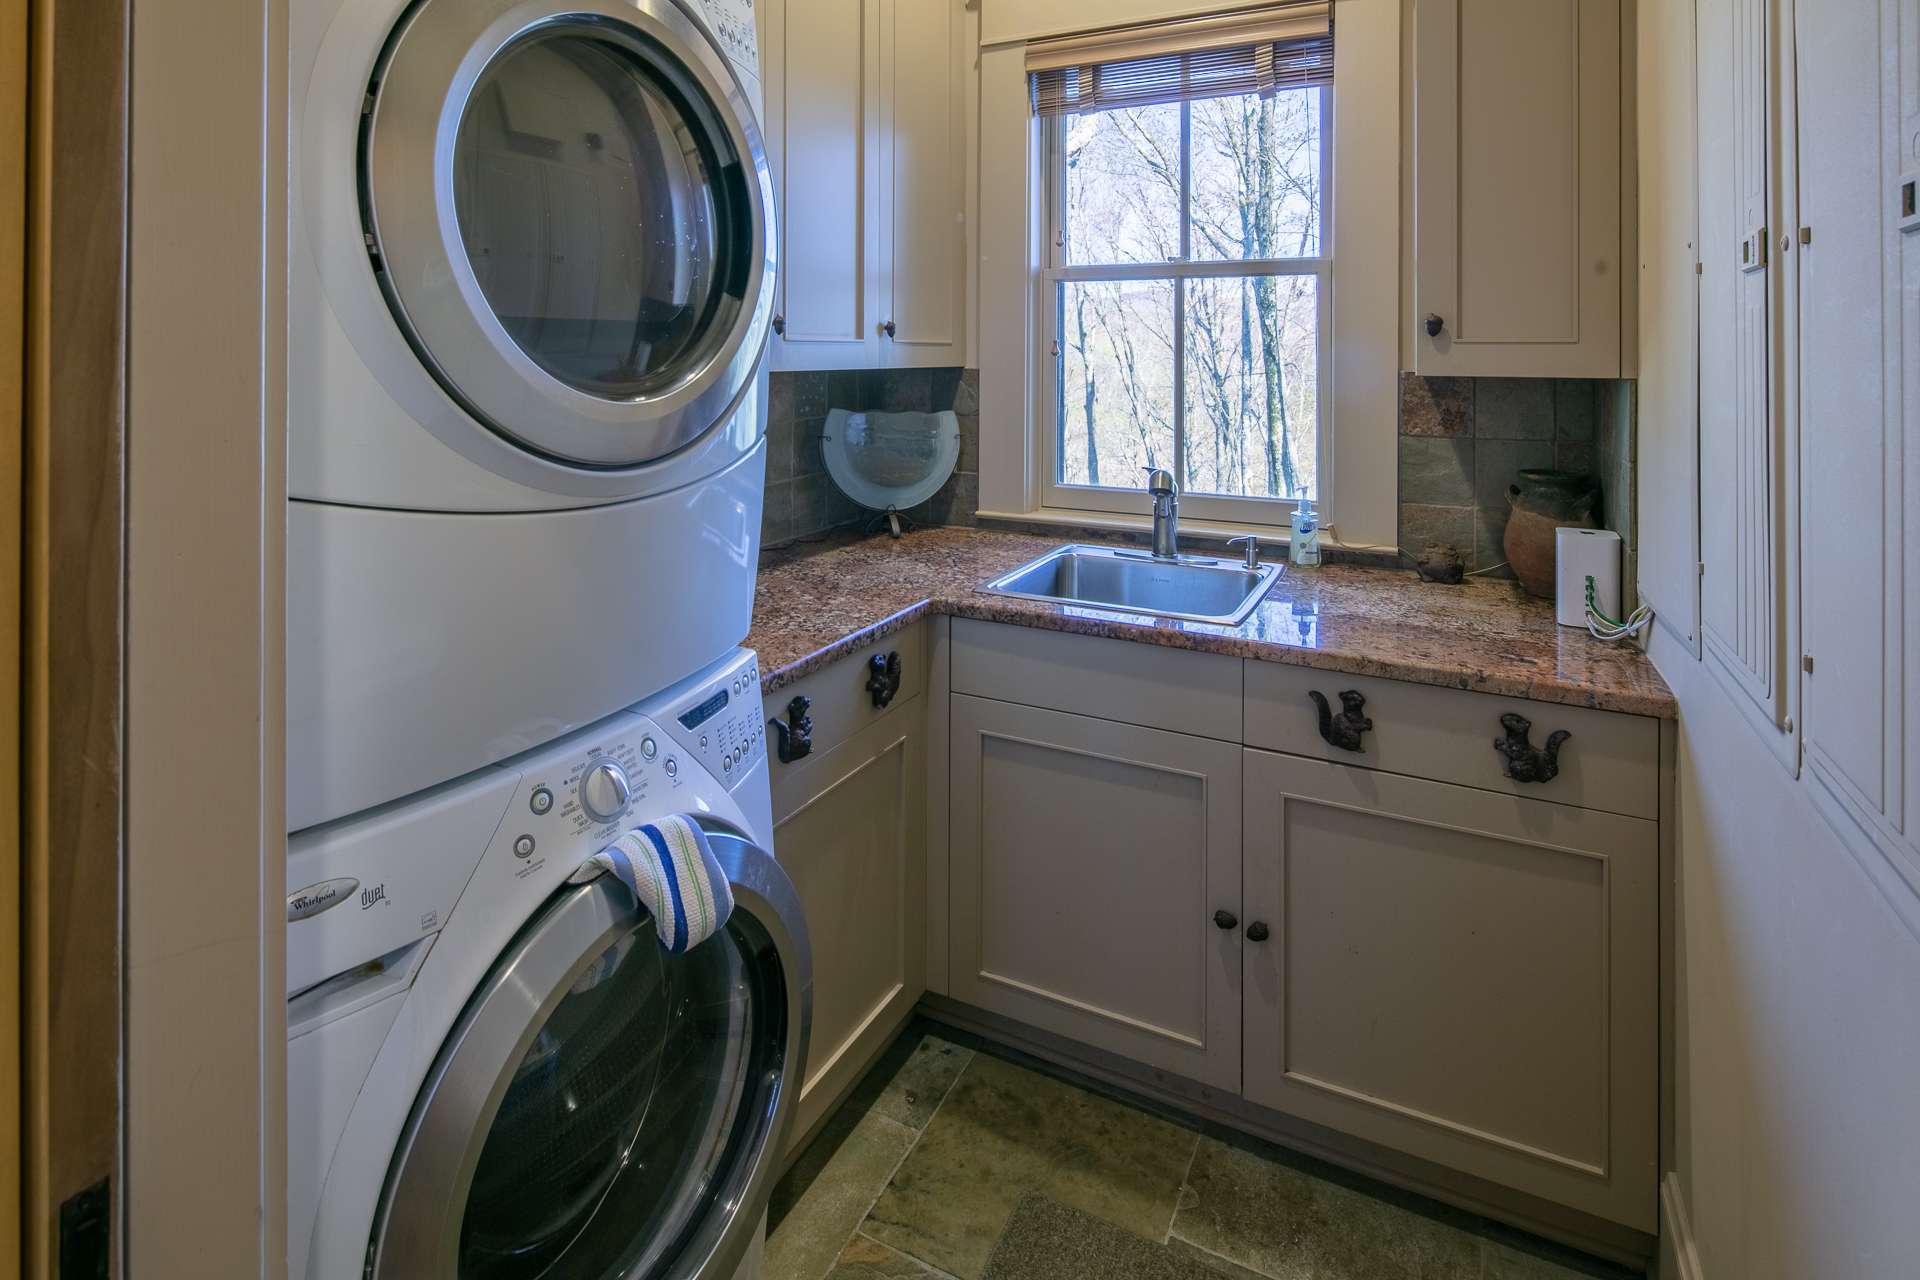 The Laundry room is conveniently located between the side entrance and kitchen.  It offers upper and lower cabinetry, granite counter top, sink and stacked Whirlpool washer and dryer.